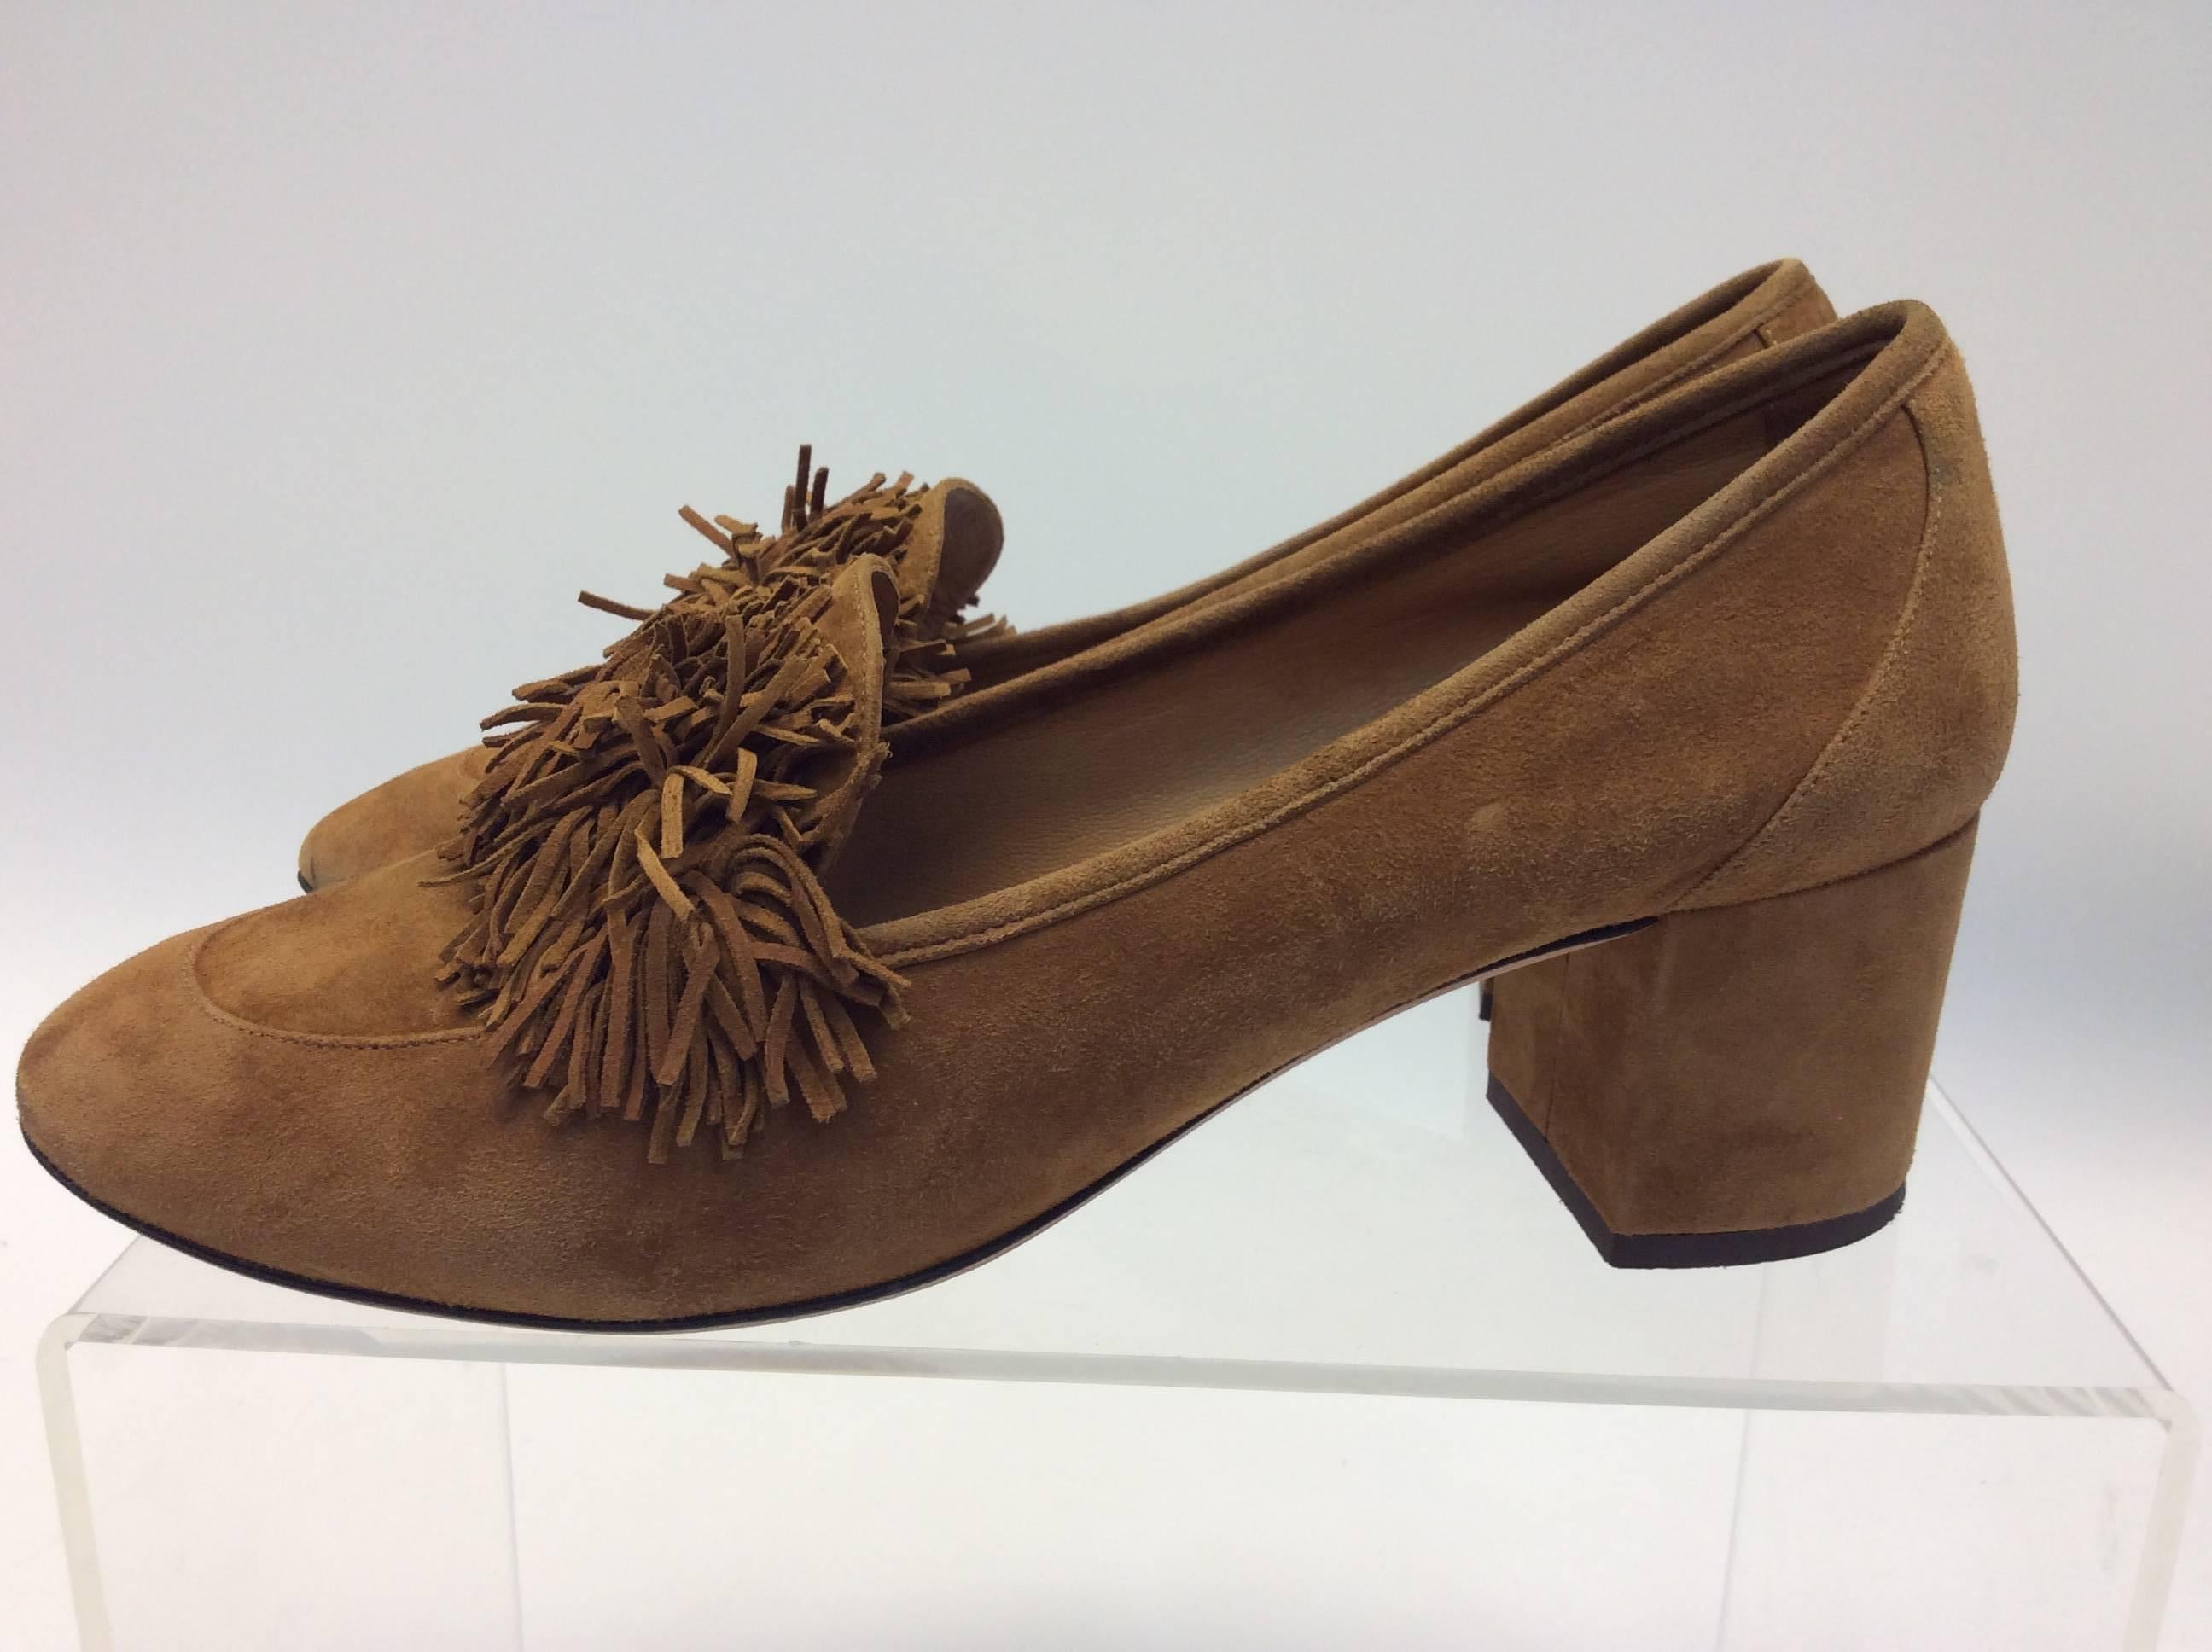 Aquazzura Camel Fringe Suede Loafer 
$199
Suede
Made in Italy Size 39
2.25